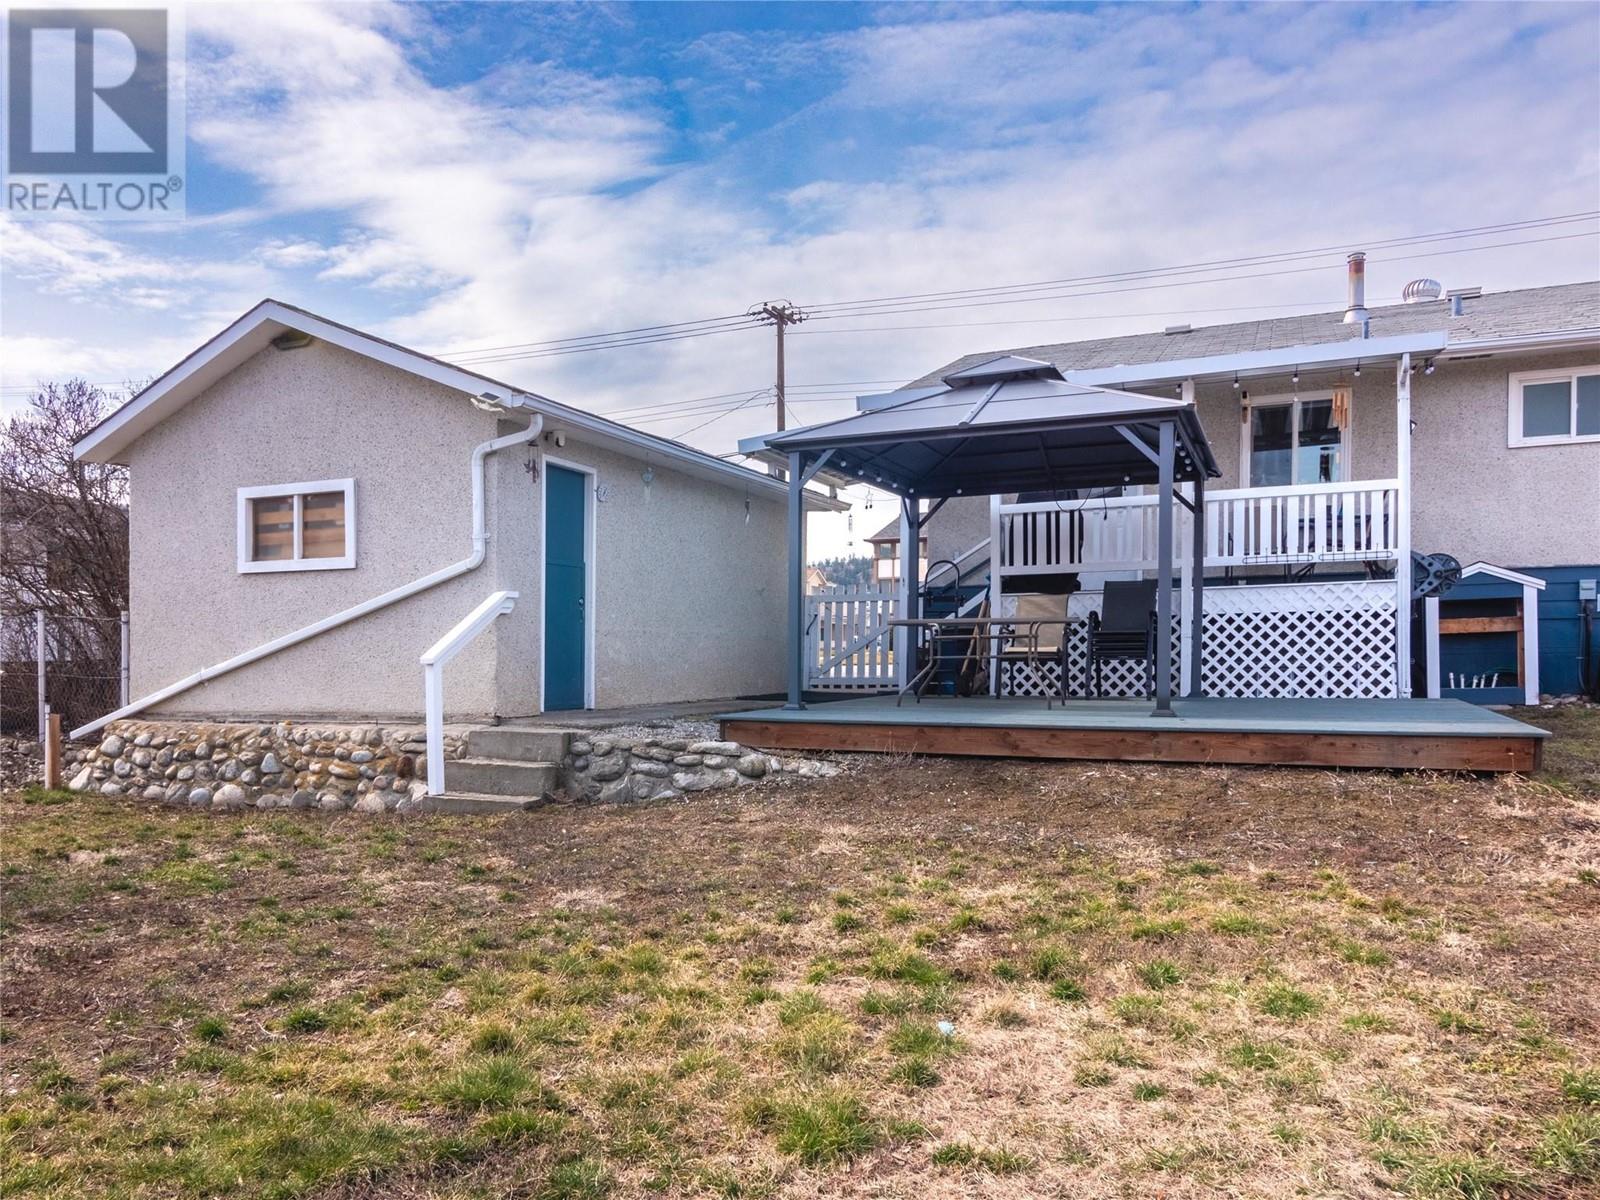  13015 Armstrong Avenue, Summerland